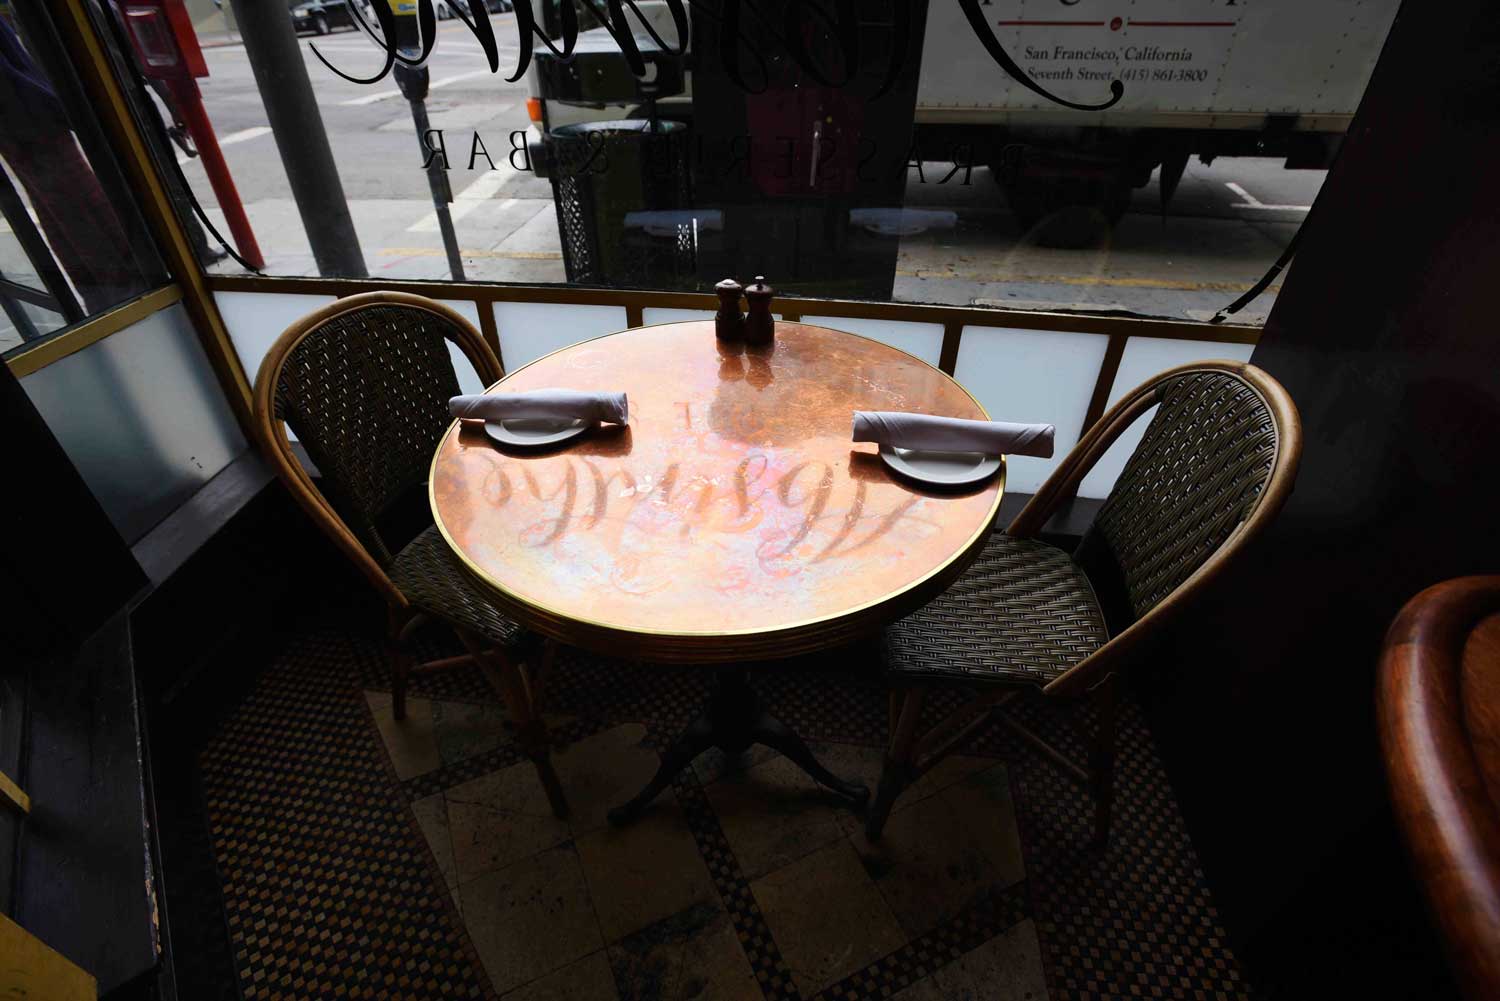 The Absinthe logo reflects in the marbly bistro seats at the front windows